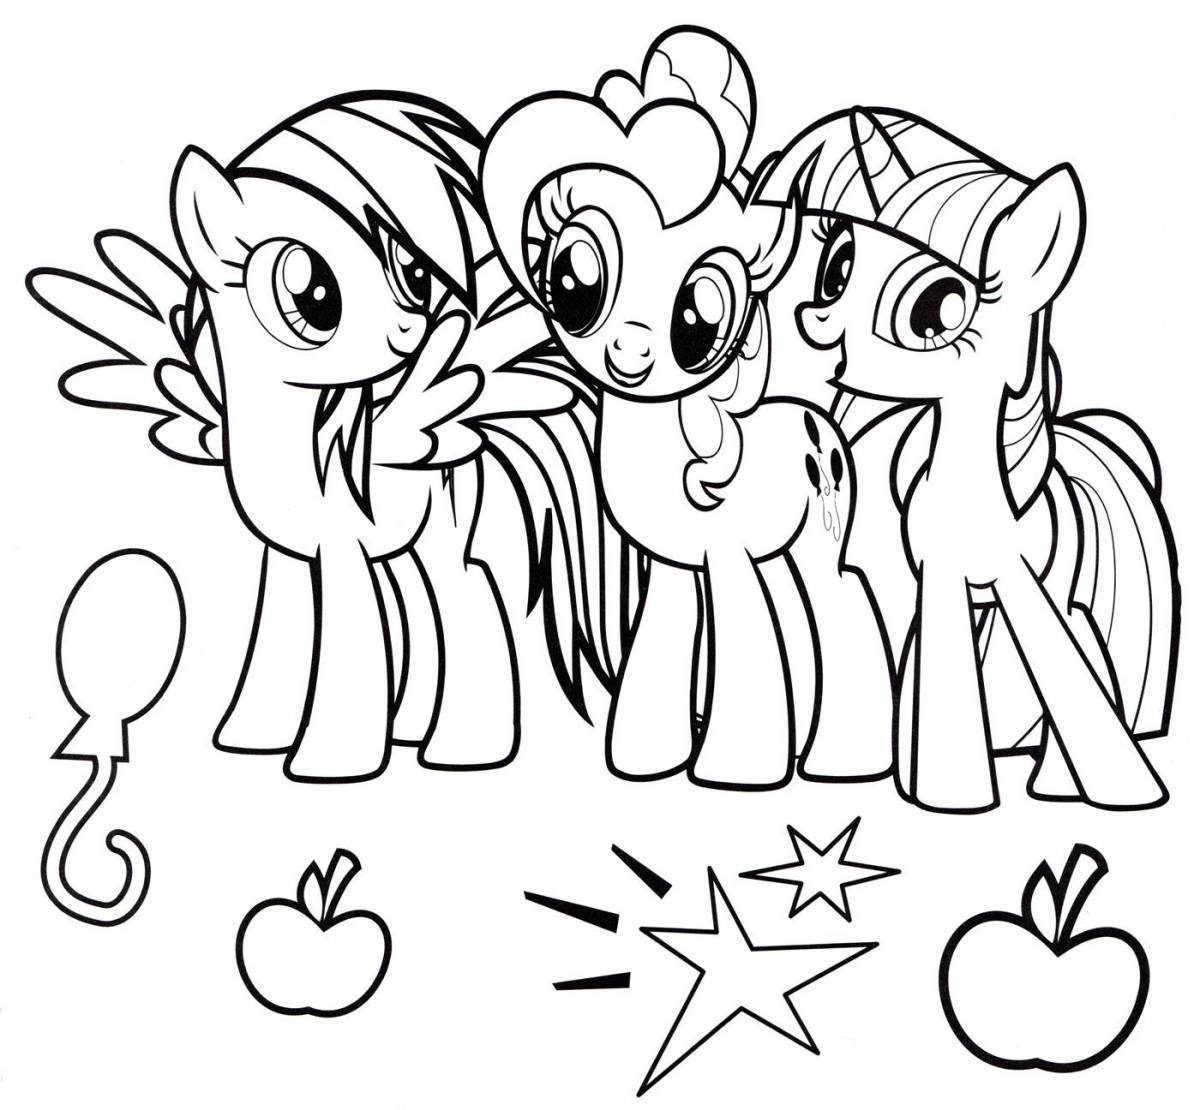 Clear pony coloring page